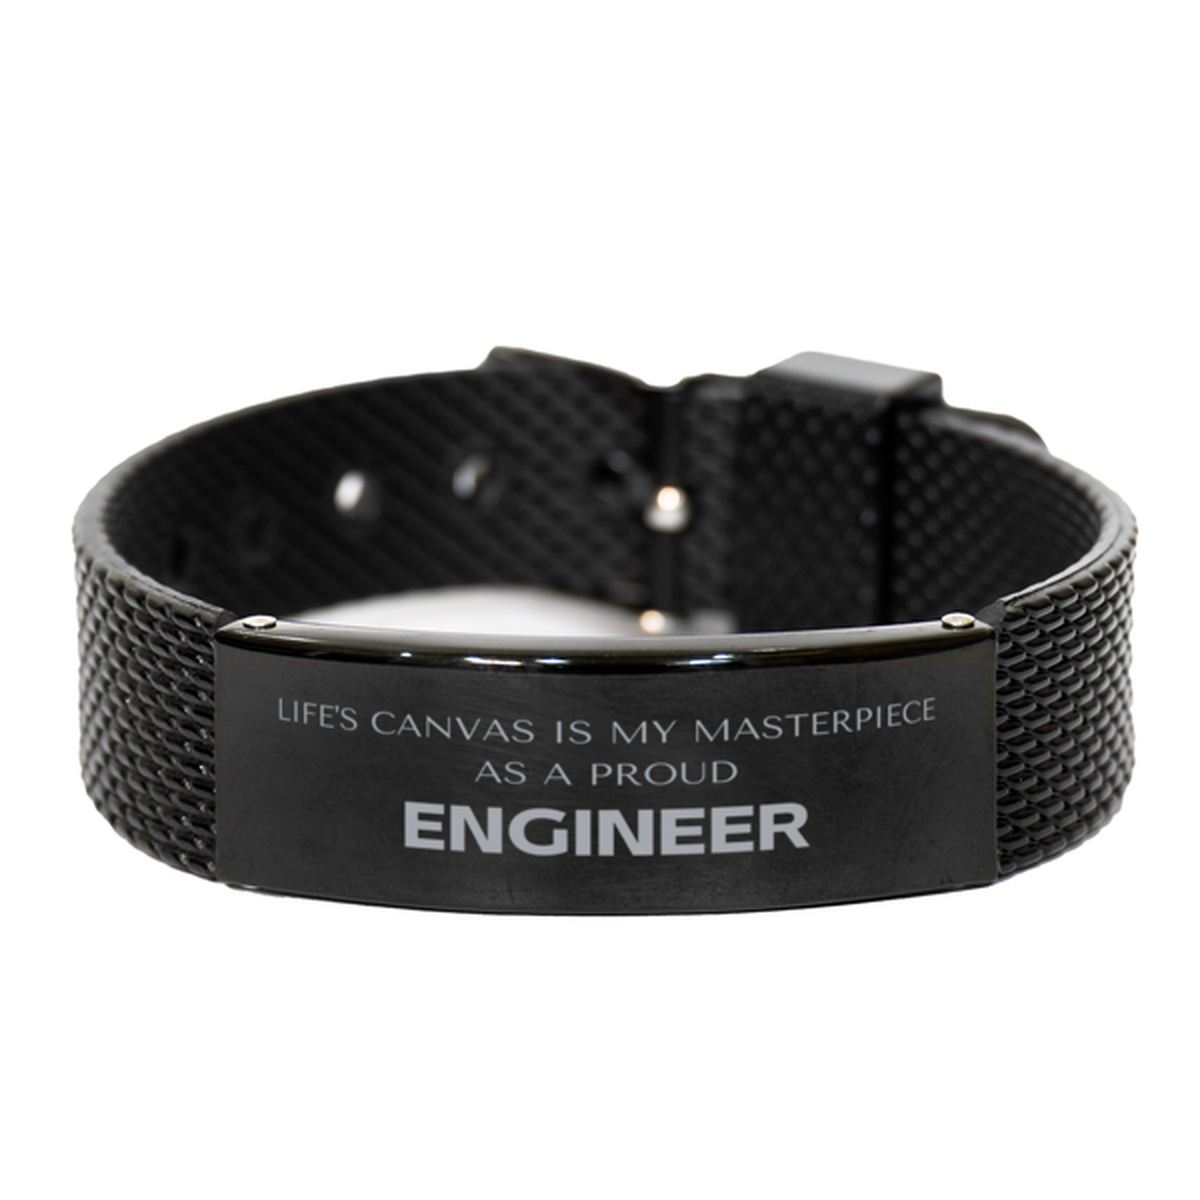 Proud Engineer Gifts, Life's canvas is my masterpiece, Epic Birthday Christmas Unique Black Shark Mesh Bracelet For Engineer, Coworkers, Men, Women, Friends